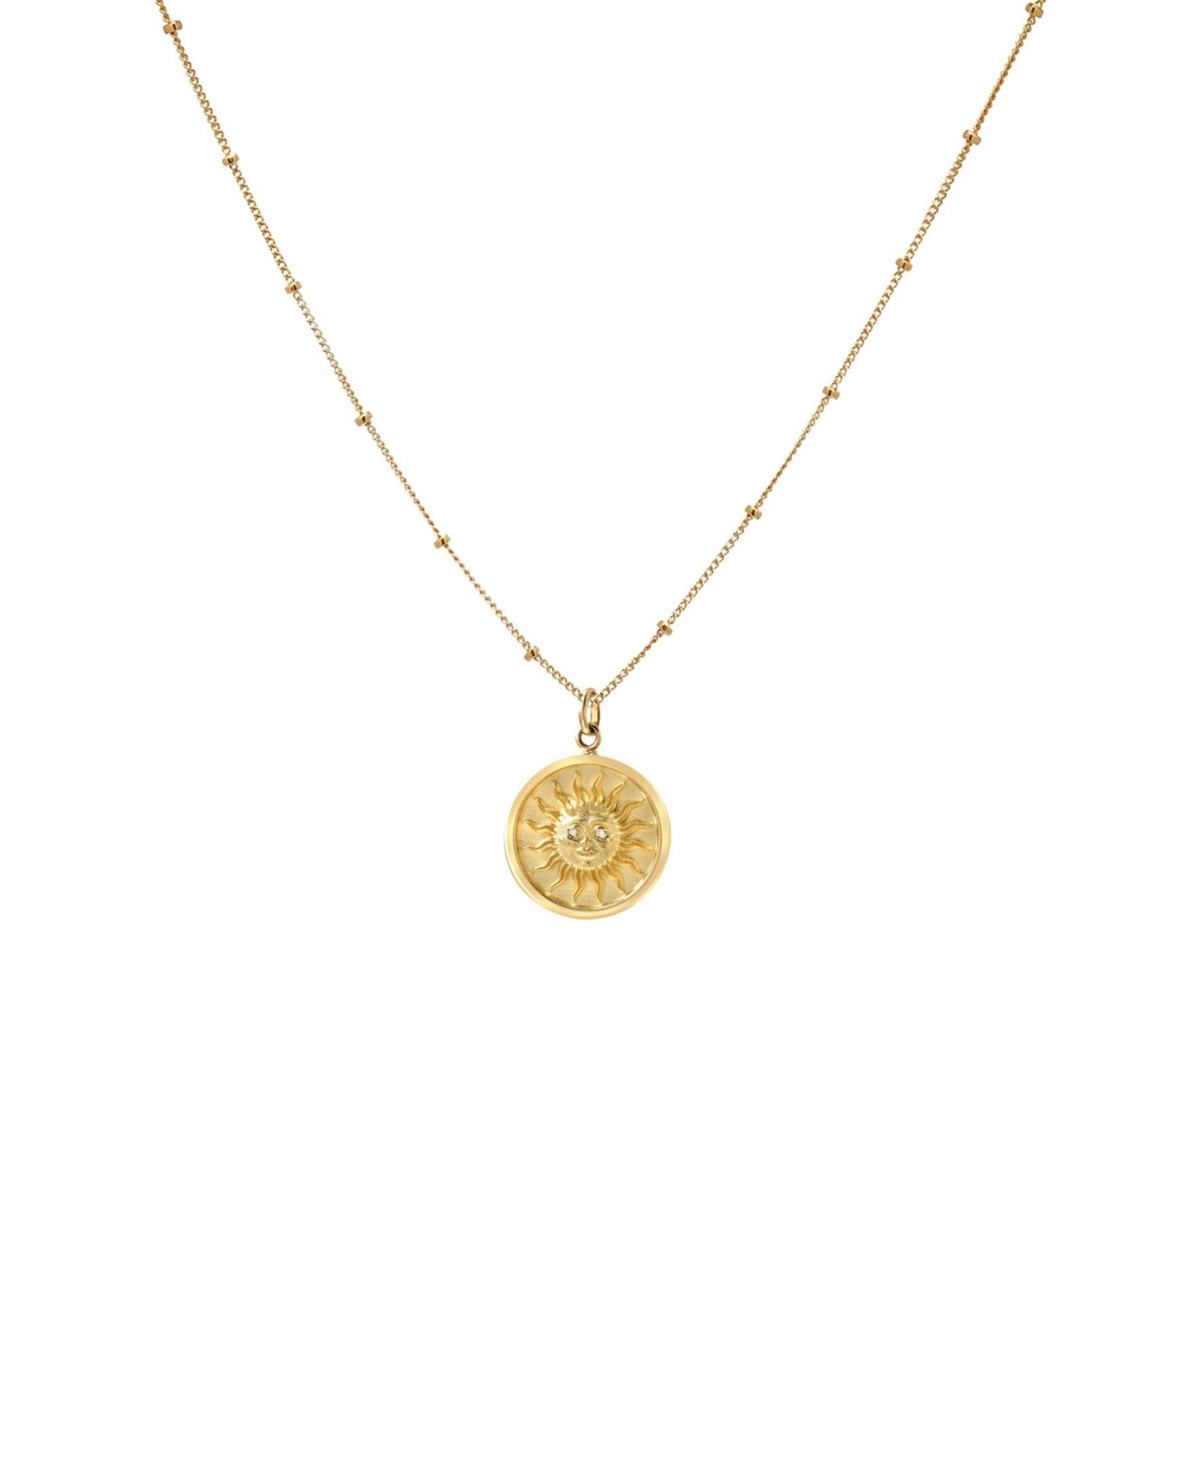 Zoe Lev Sun Medallion with Segment 14K Yellow Gold Chain Necklace - Gold